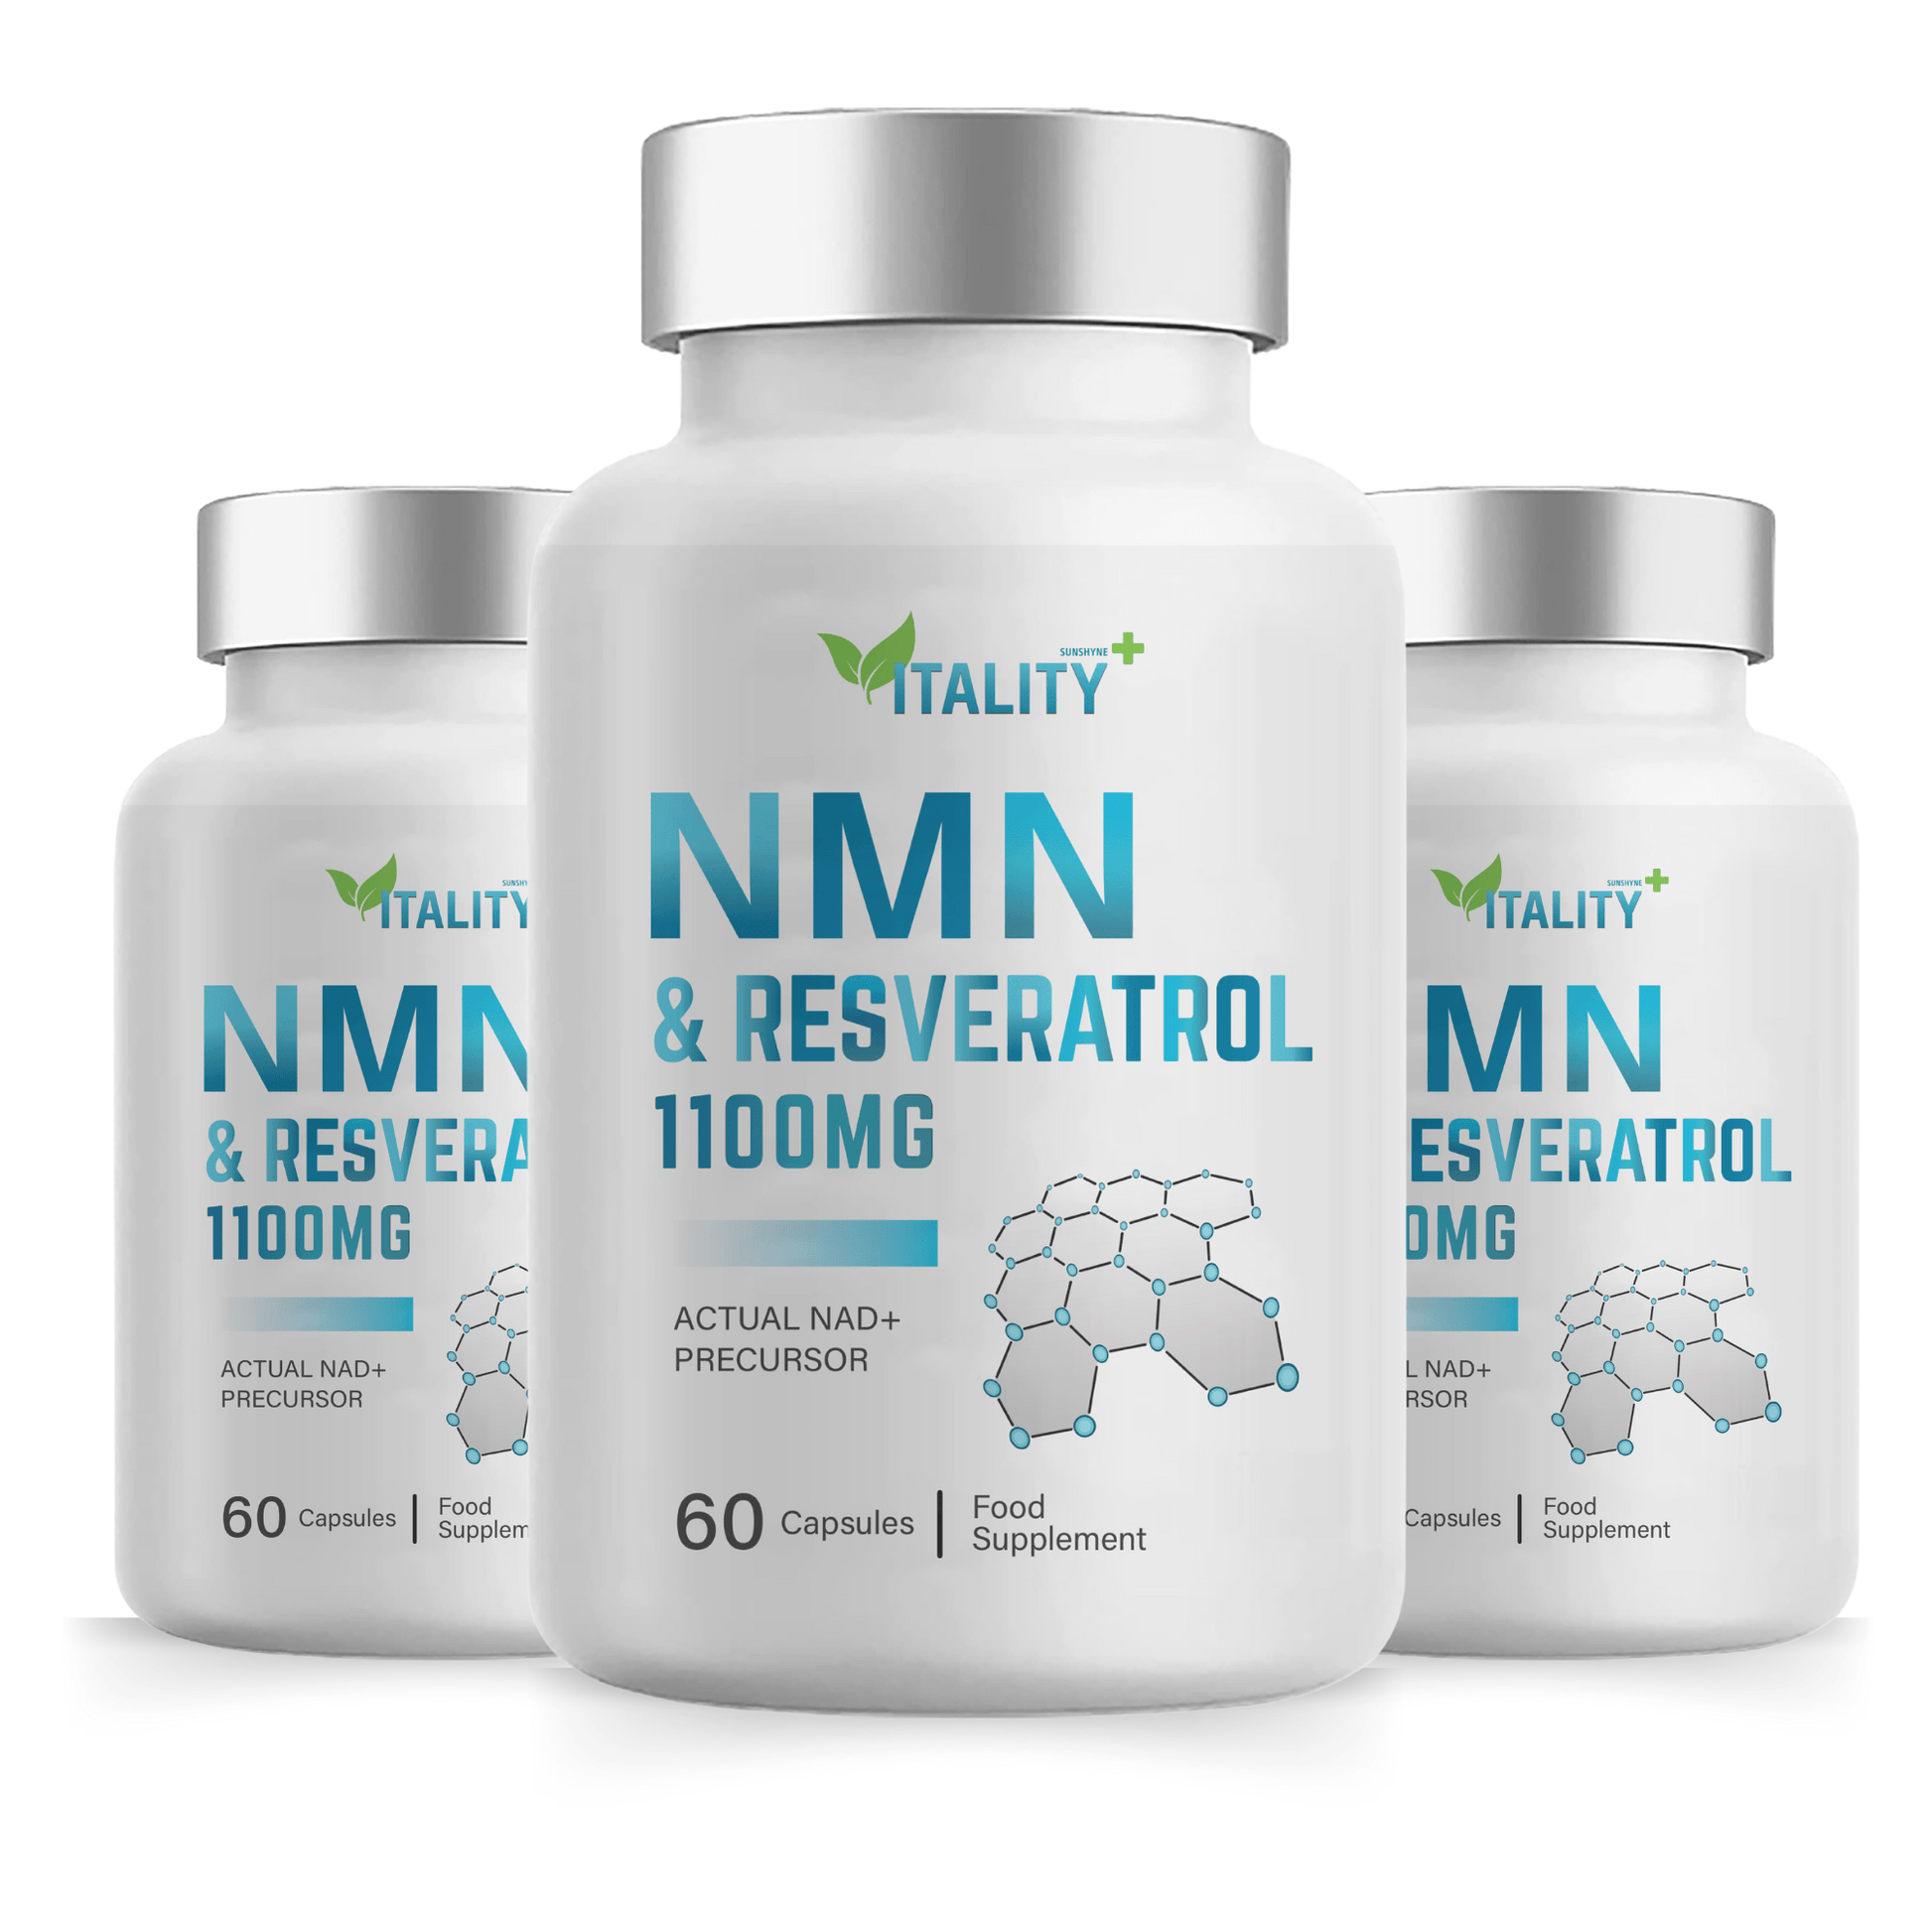 NMN & Resveratrol | 1100mg | 99.95% Certified Purity | 180 Caps | NAD+ | 3 Months Supply - Vitality Supplements